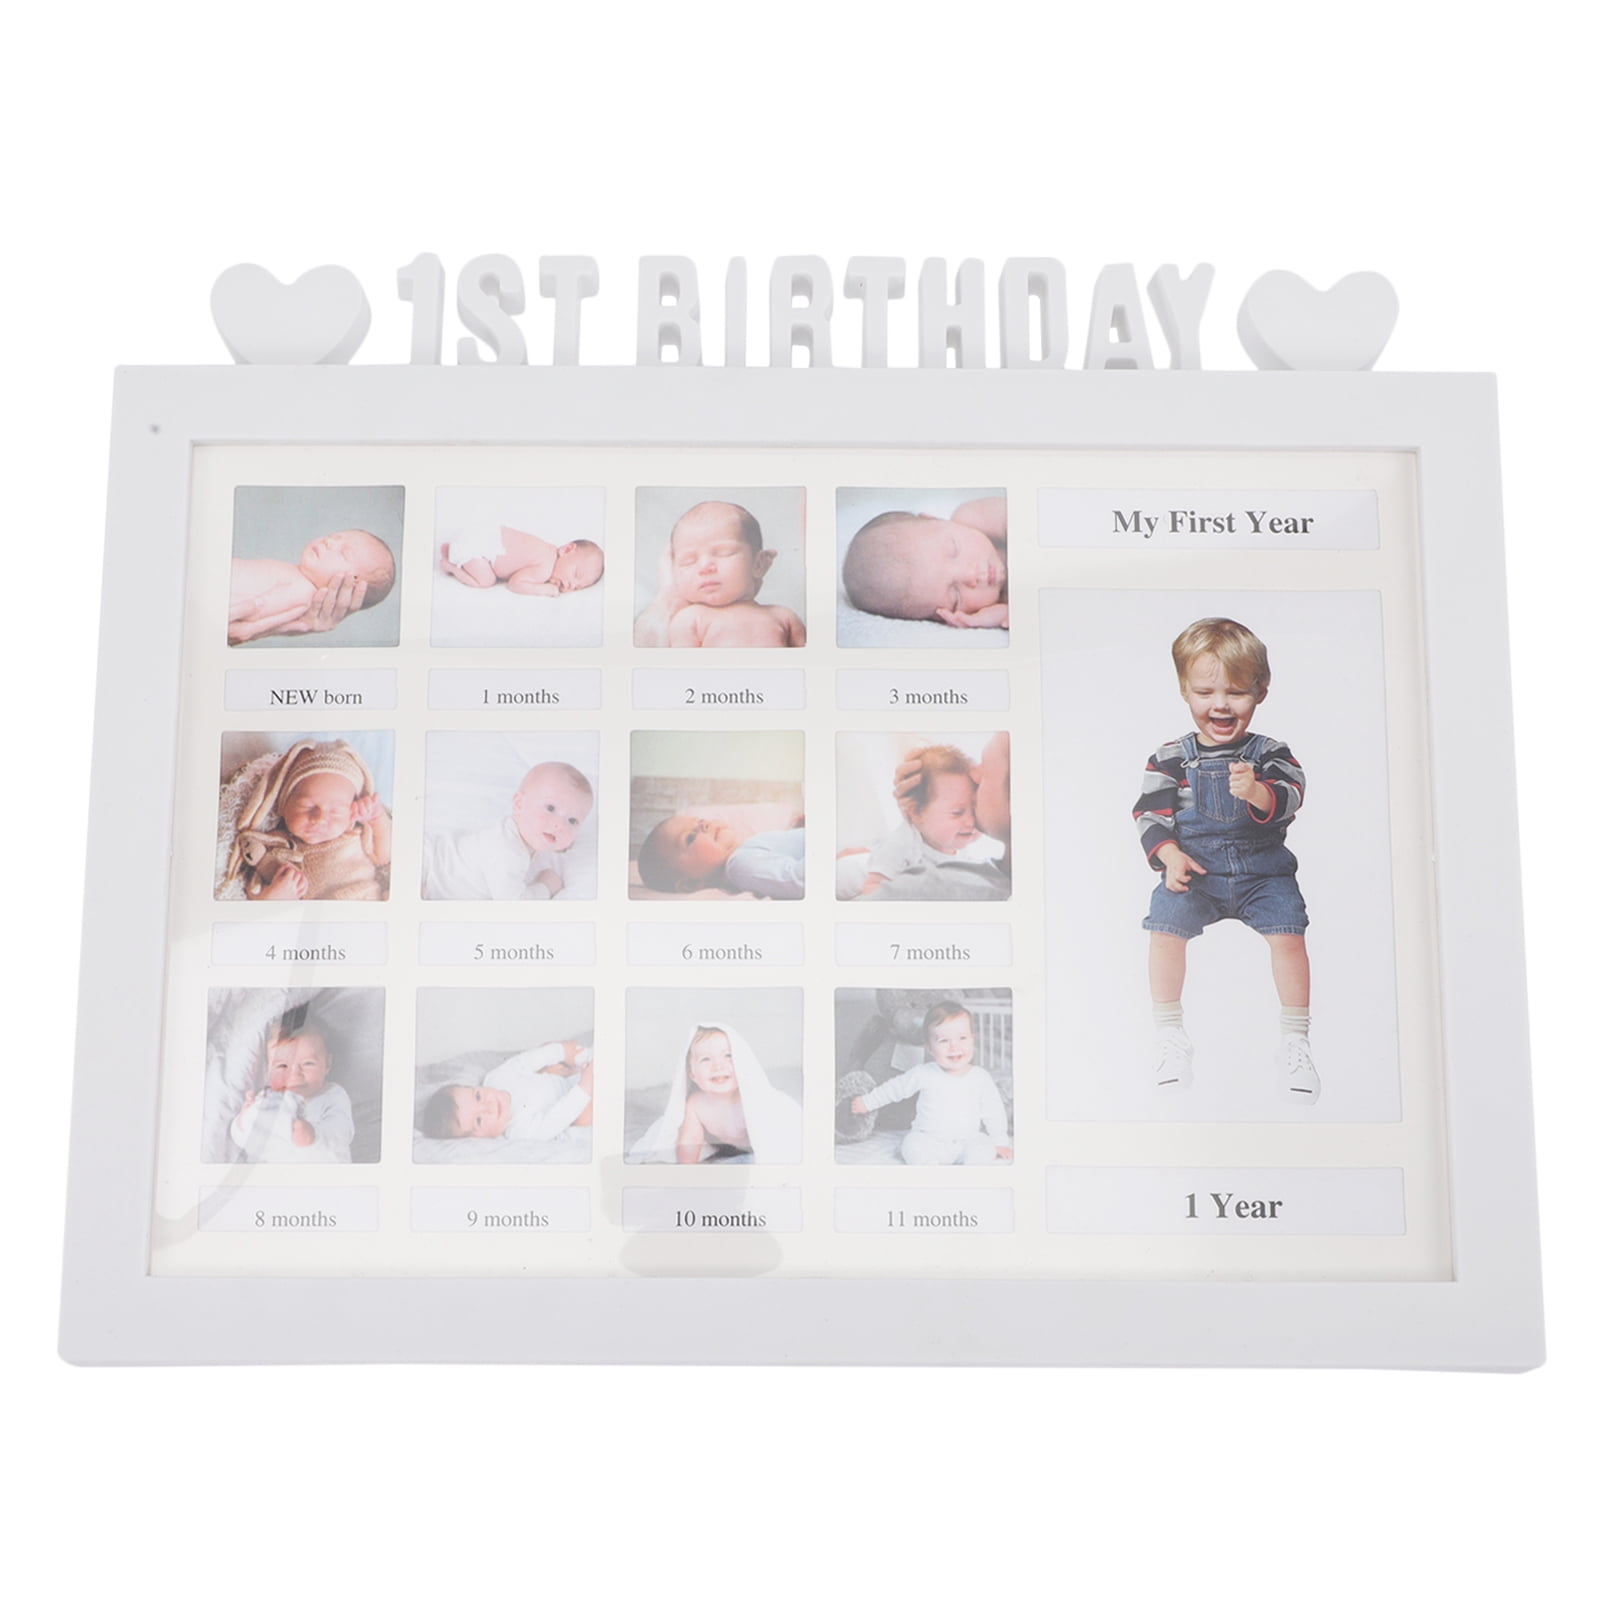 Details about   Disney Baby 12 Month Photo Frame My First Year DI418 